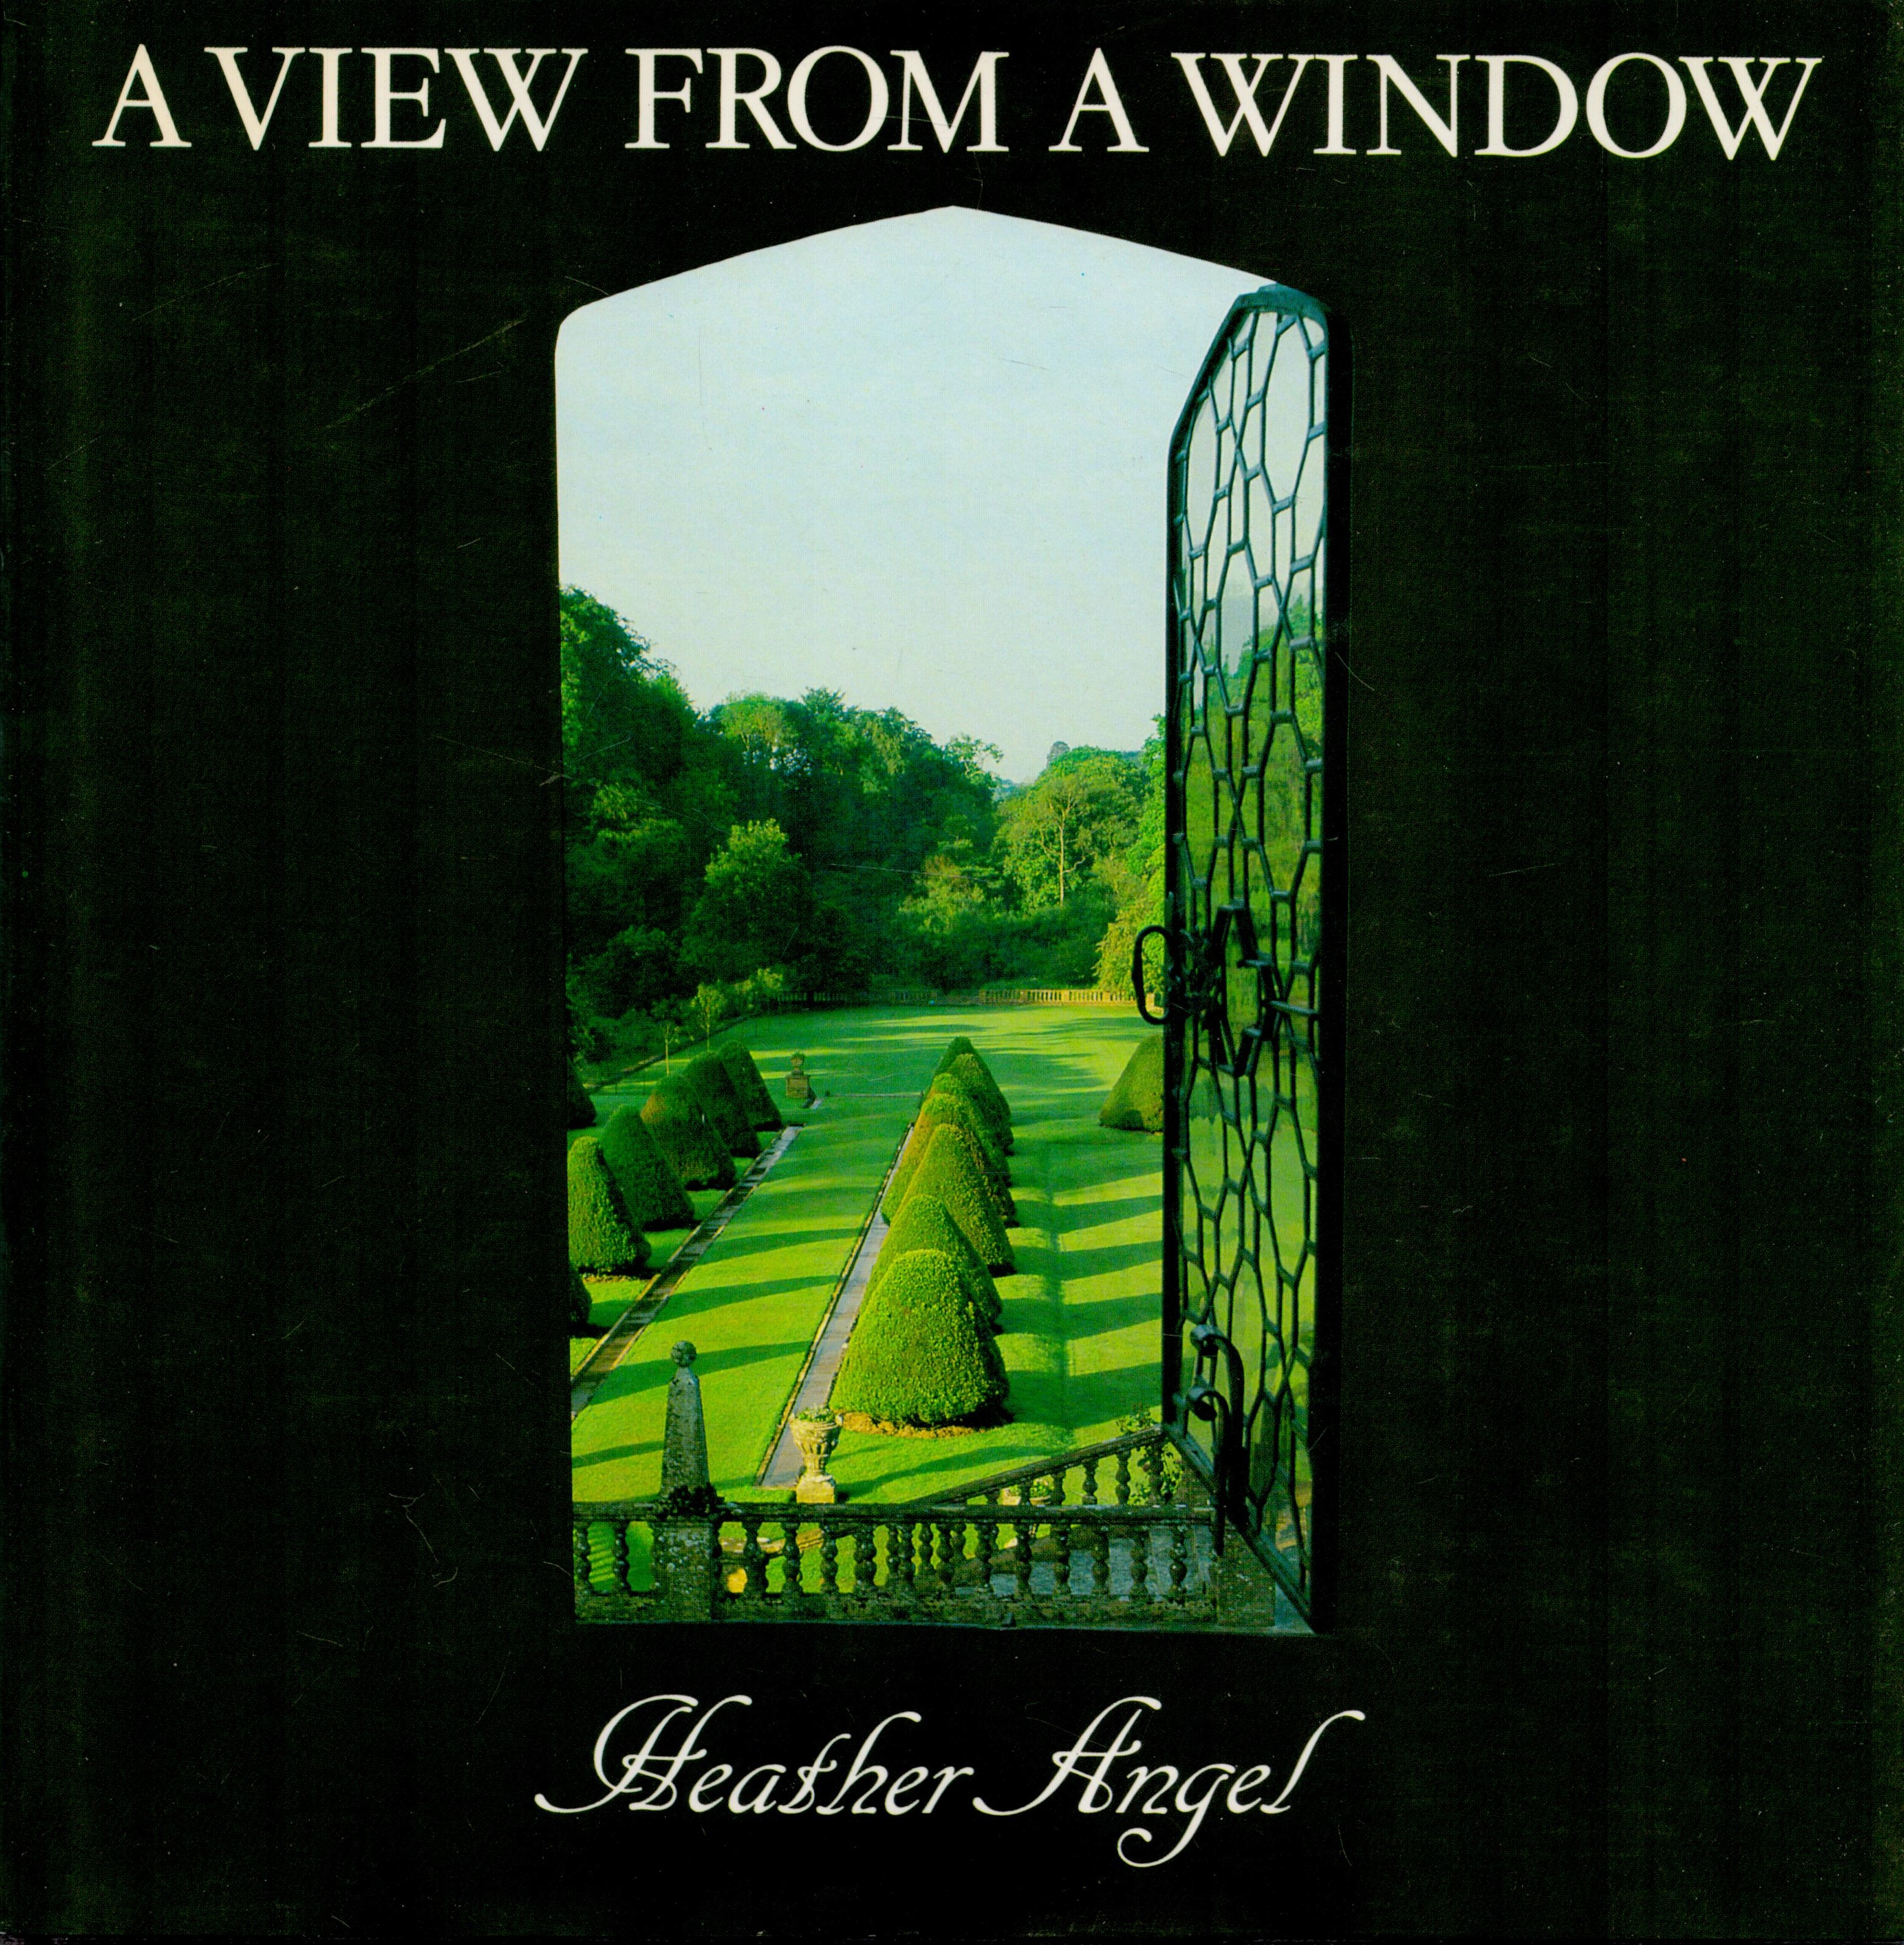 A View From A Window by Heather Angel 1988 First Edition Hardback Book with 144 pages published by